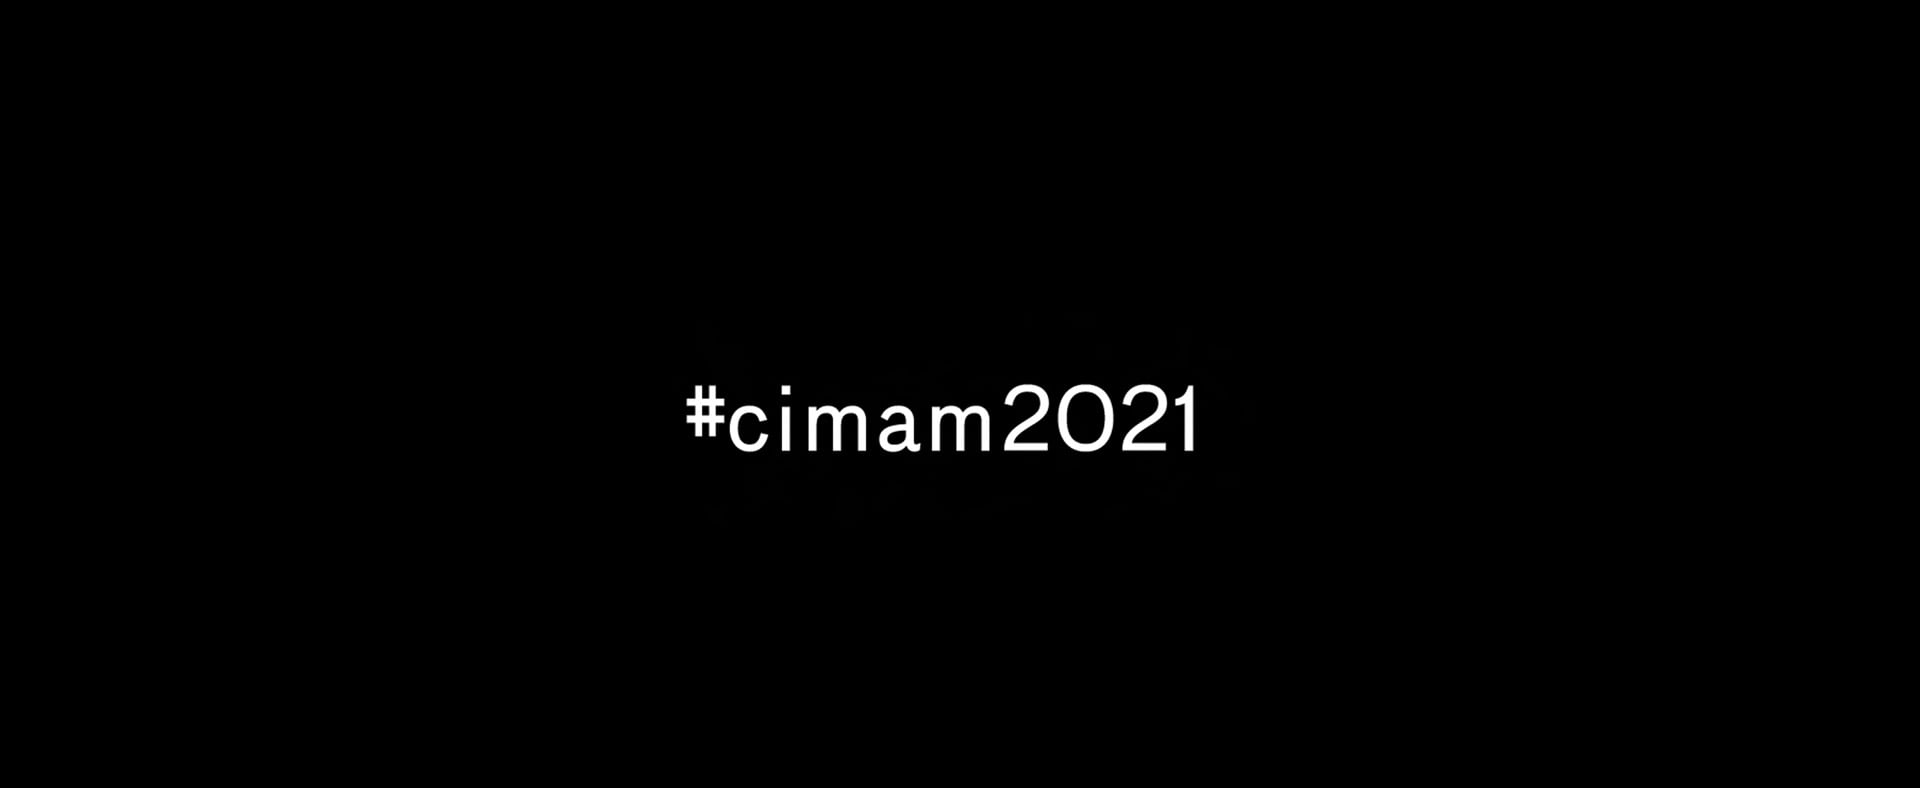 CIMAM 2021 Annual Conference